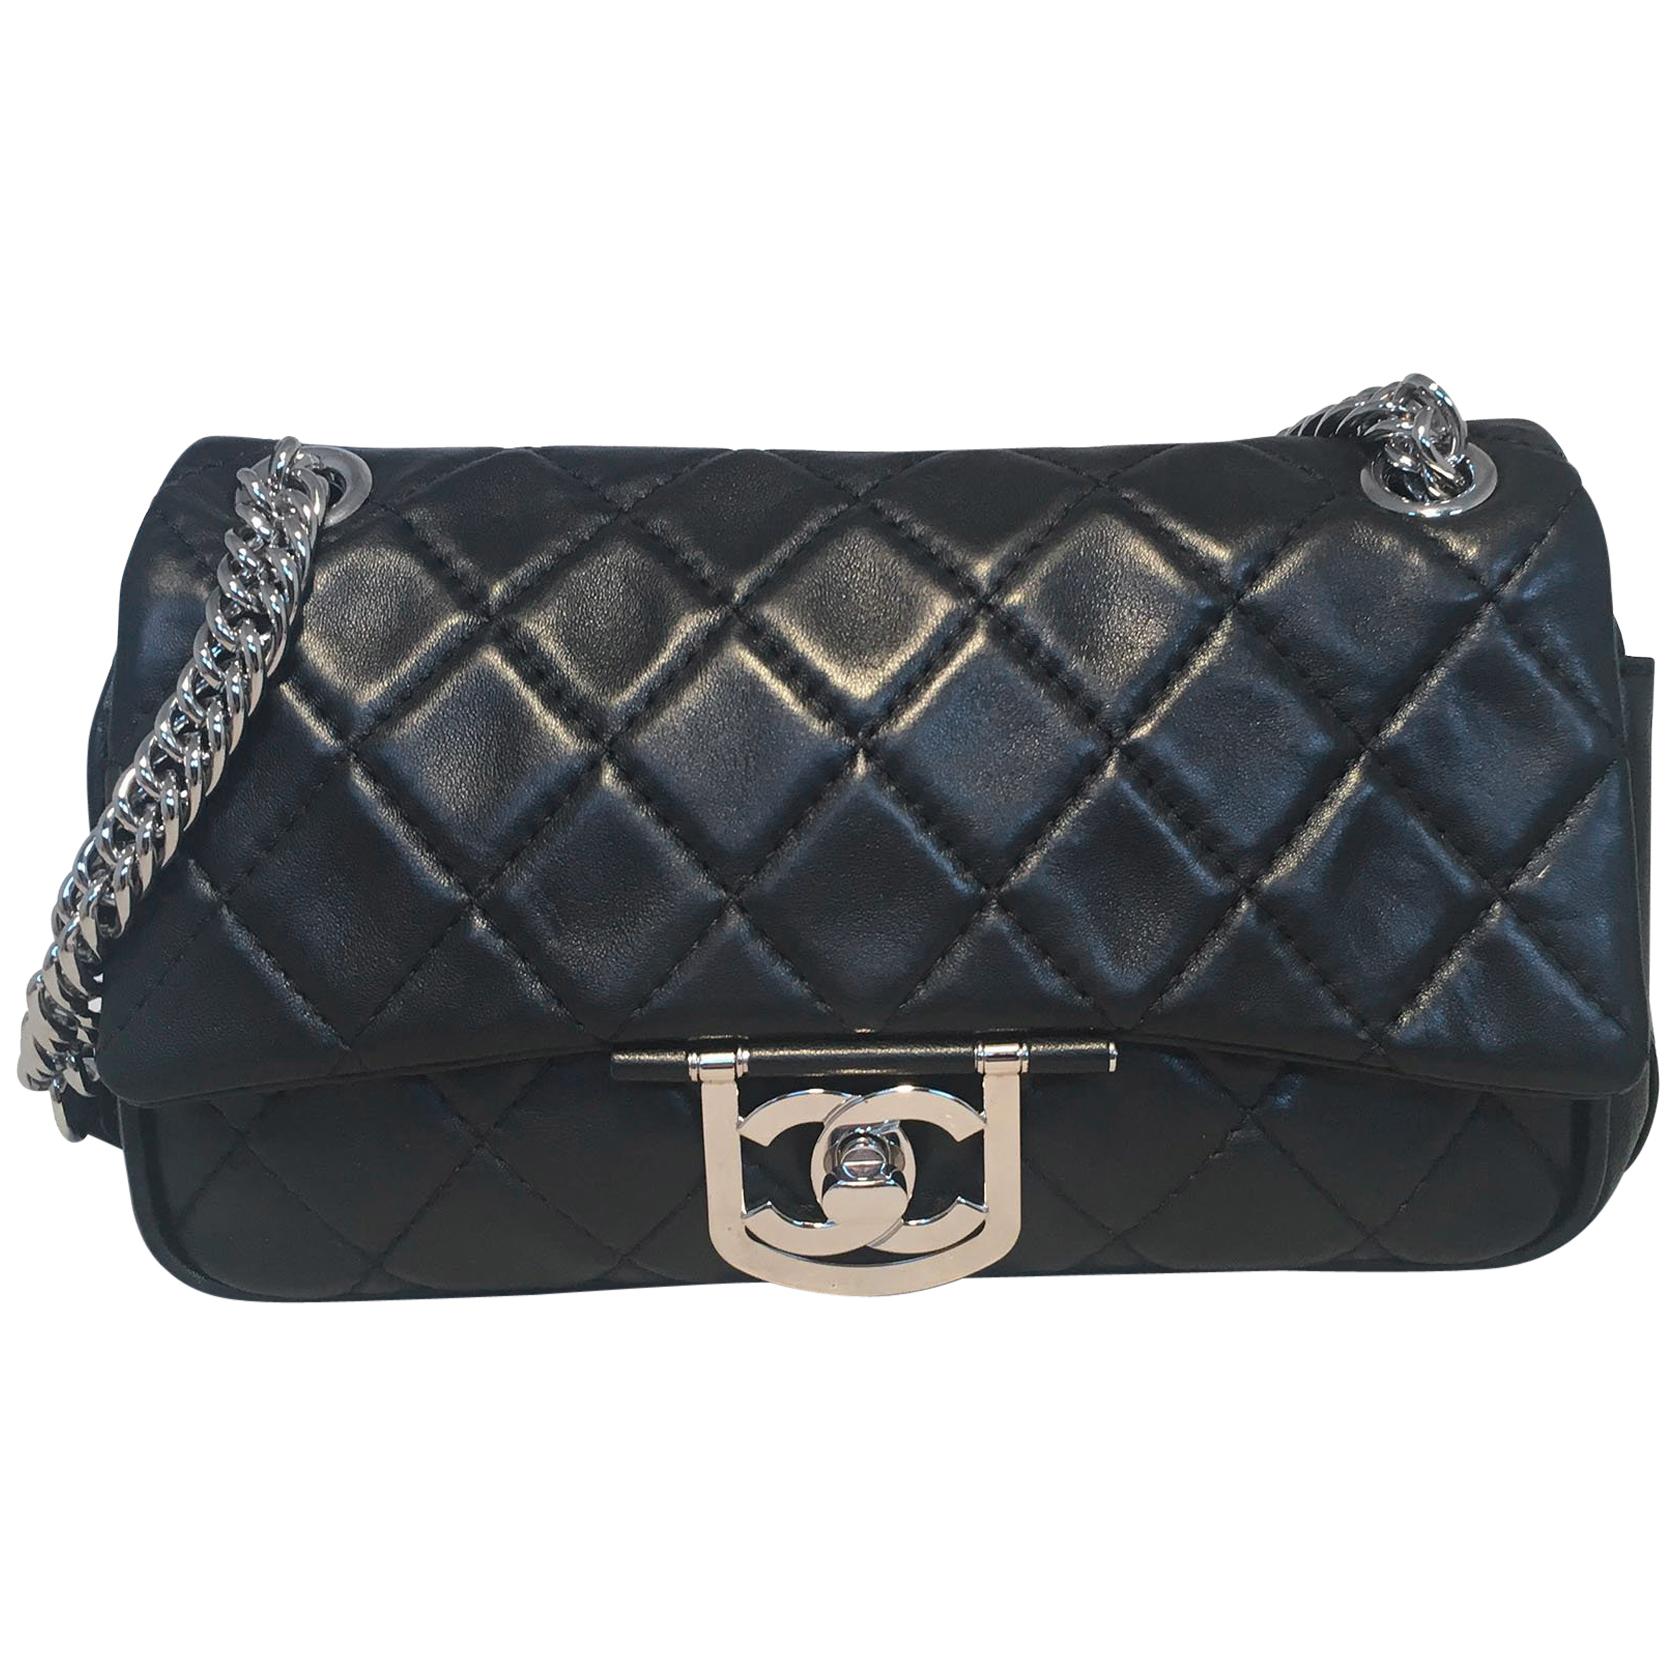 Chanel Black Leather 10inch Classic Flap with Chain Strap Shoulder Bag